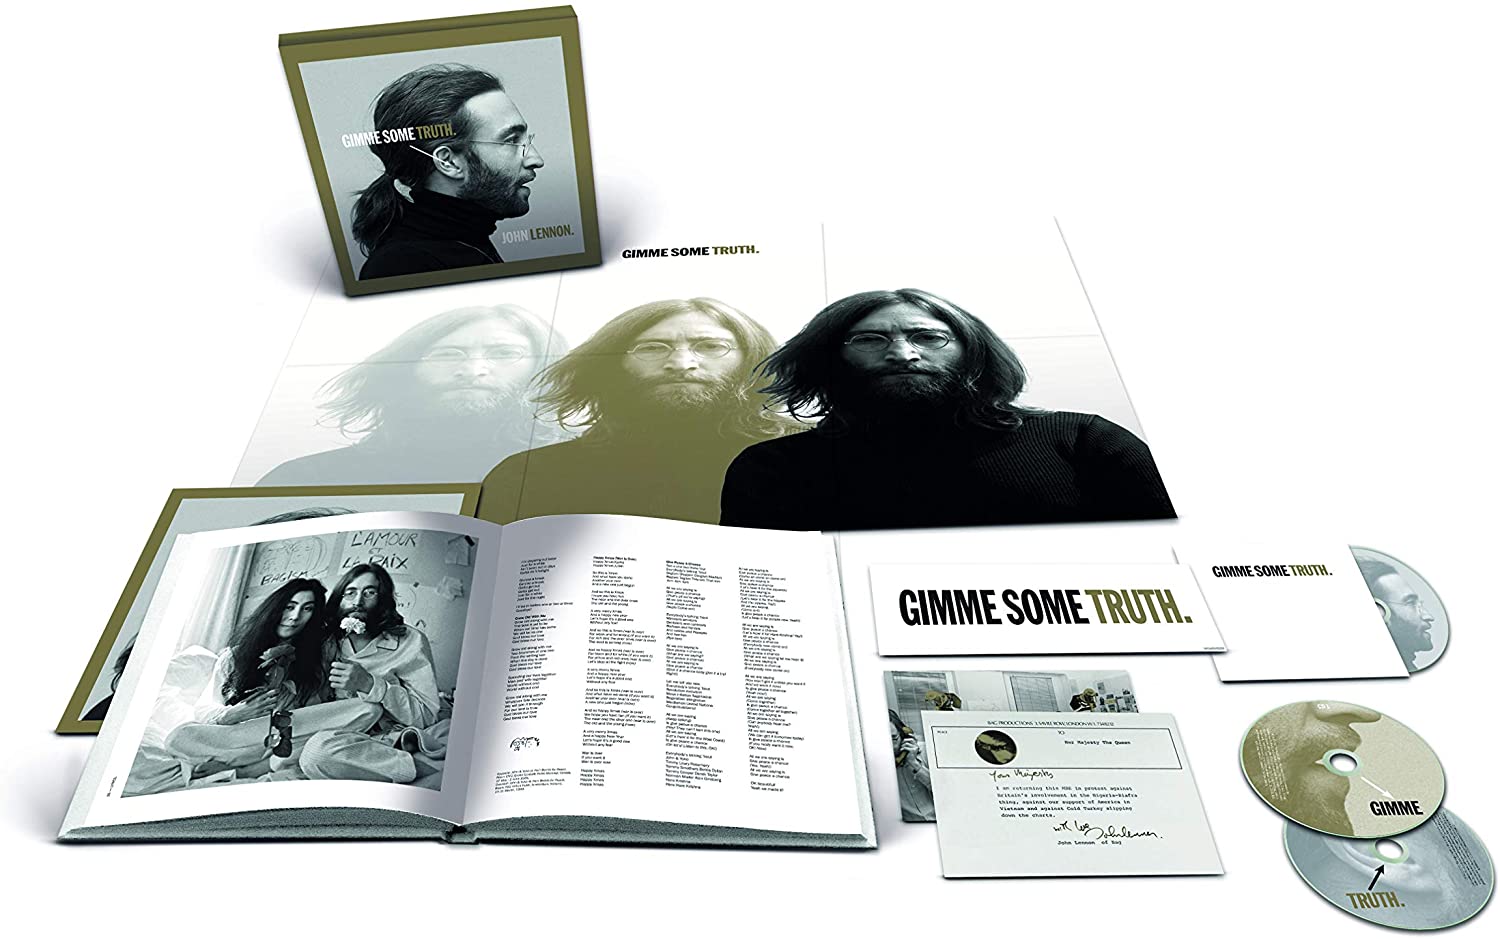 John Lennon - Gimme Some Truth (Deluxe Edition) (2020) [CD + Blu-ray ISO]